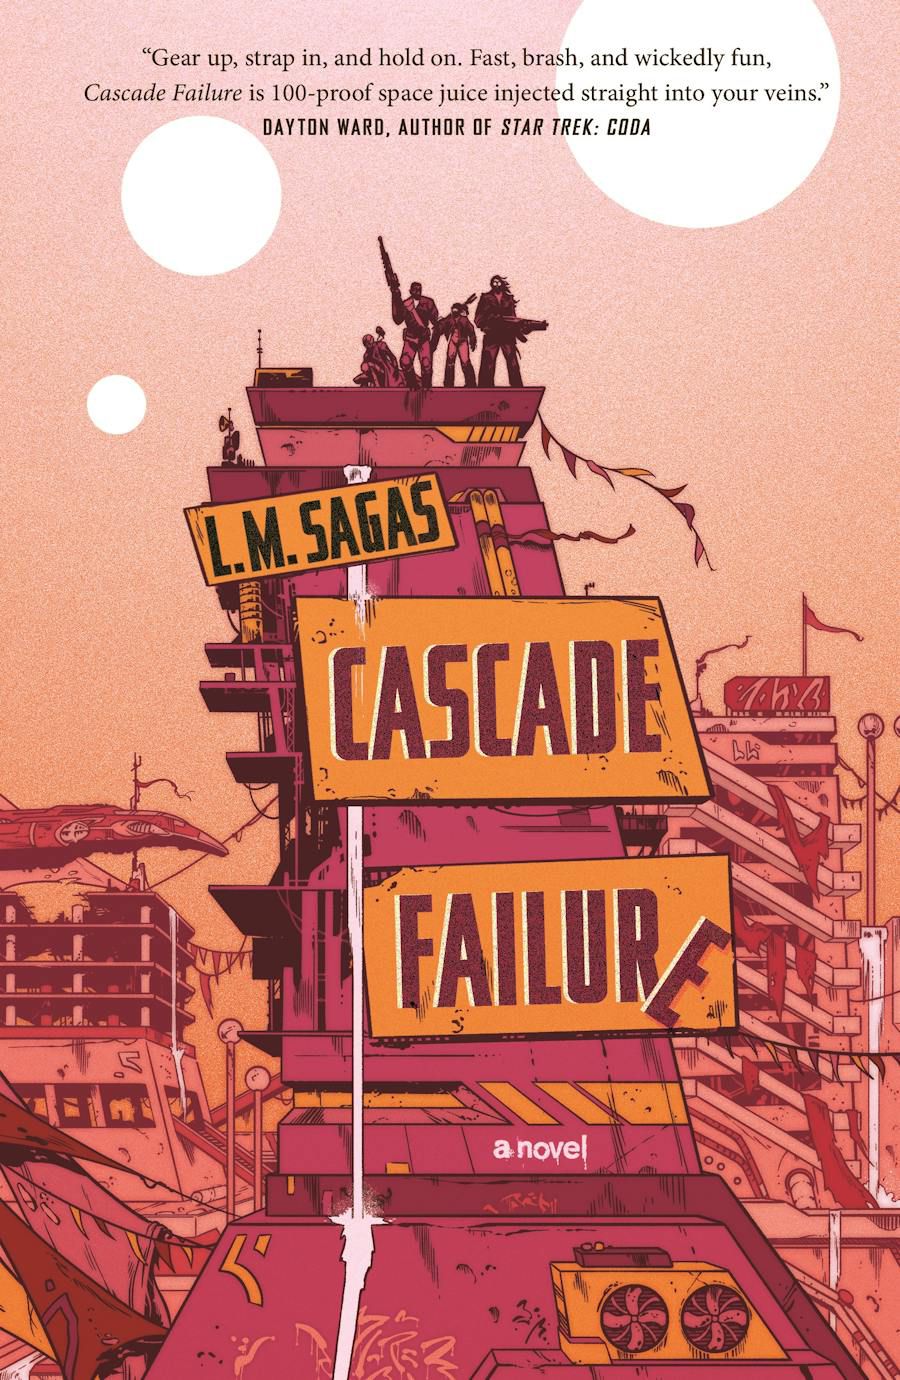 A group of people holding guns stand on the top of a building in an apocalyptic wasteland in the cover for Cascade Failure by L.M. Sagas.